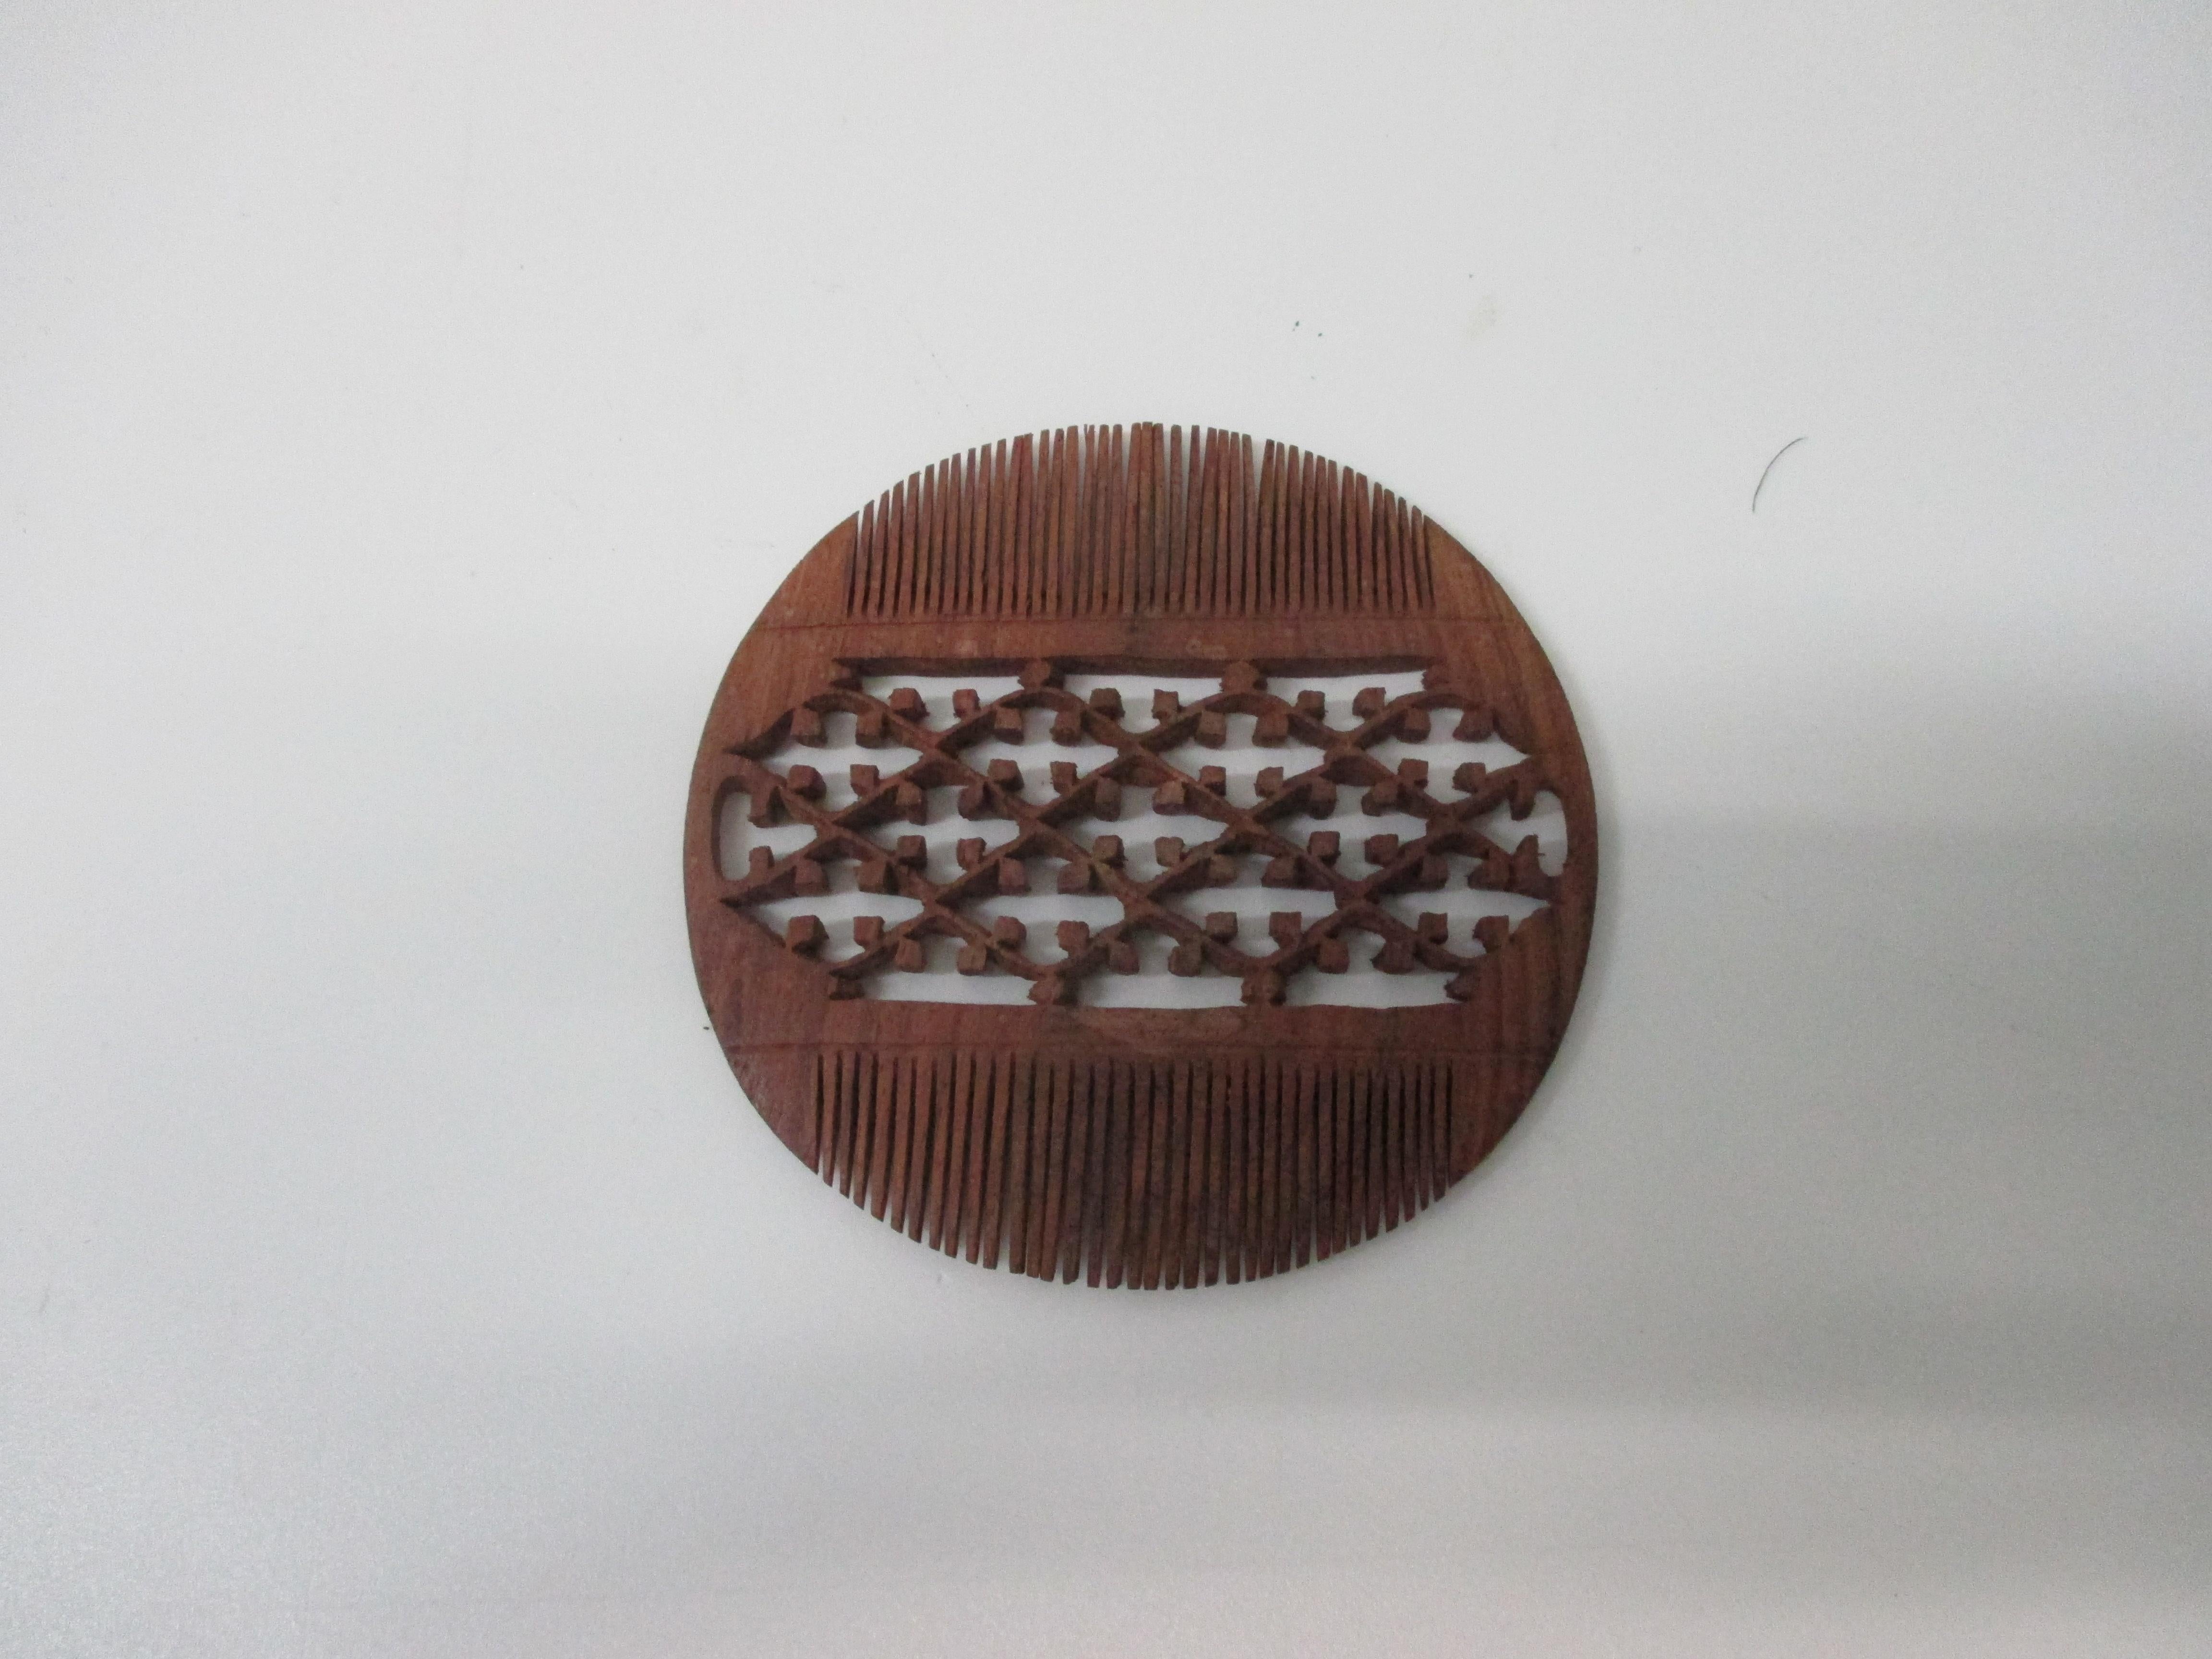 Hand carved Indian hair comb
Size: 3.75” D.